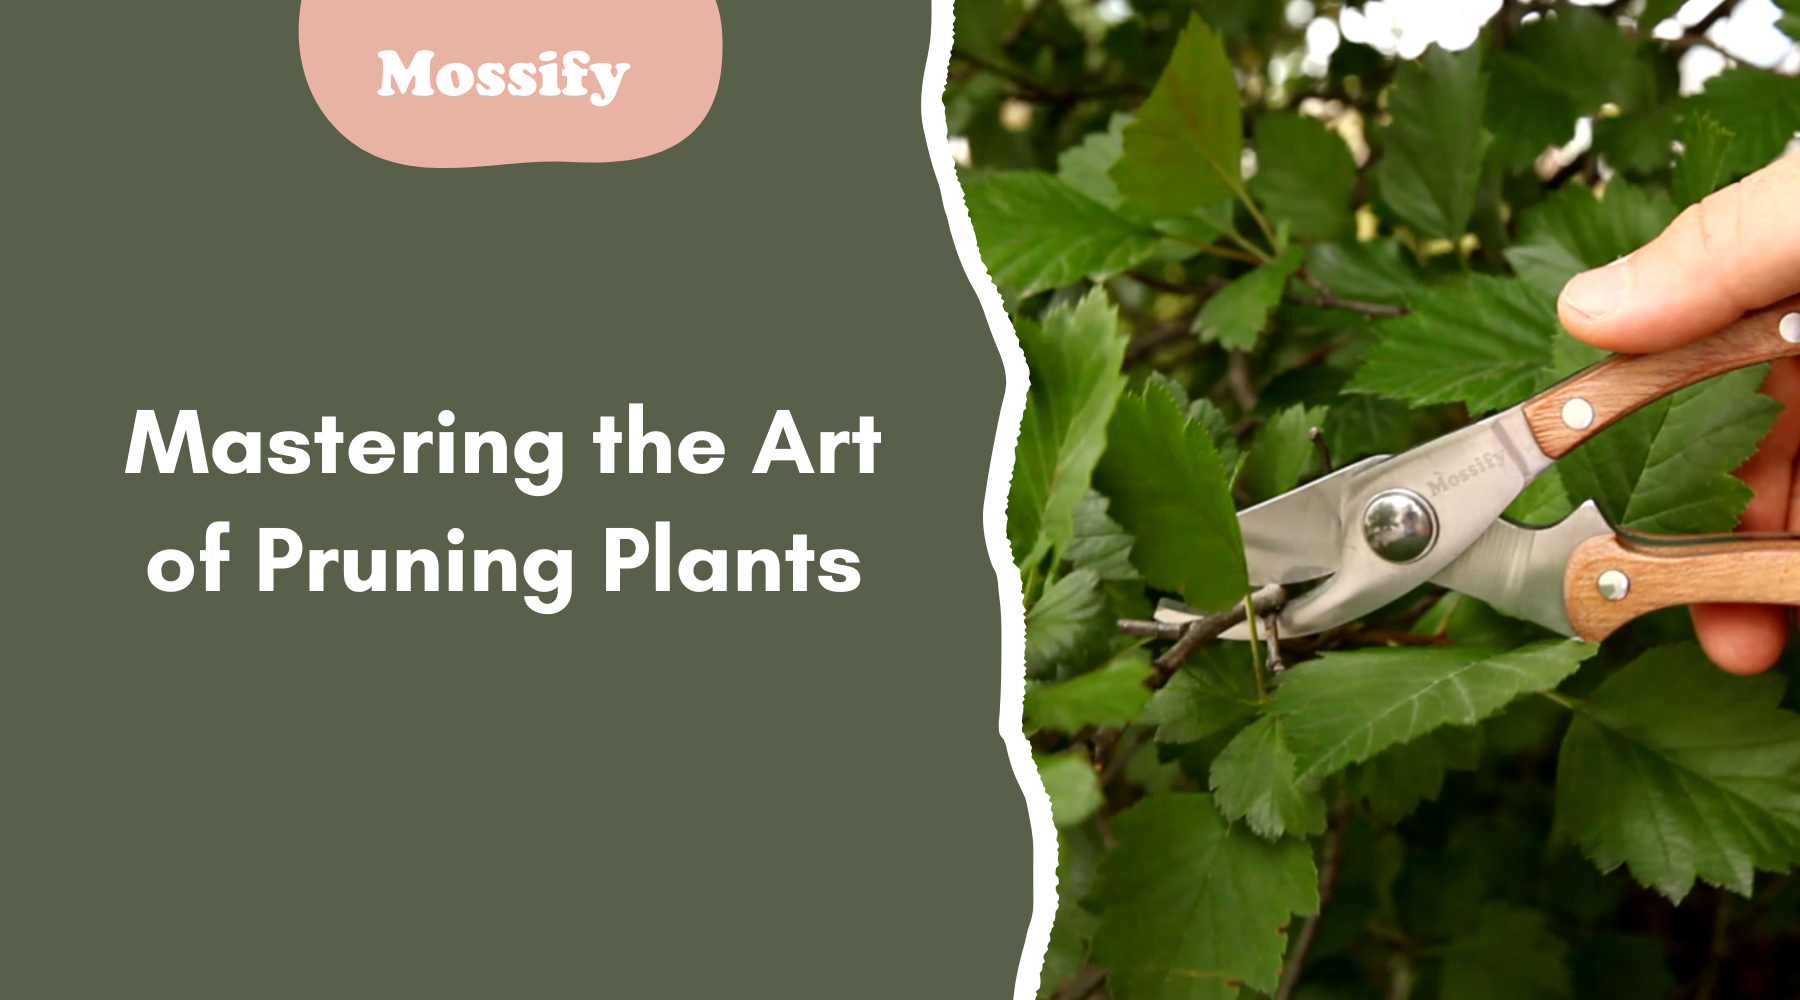 Mastering the Art of Pruning Plants